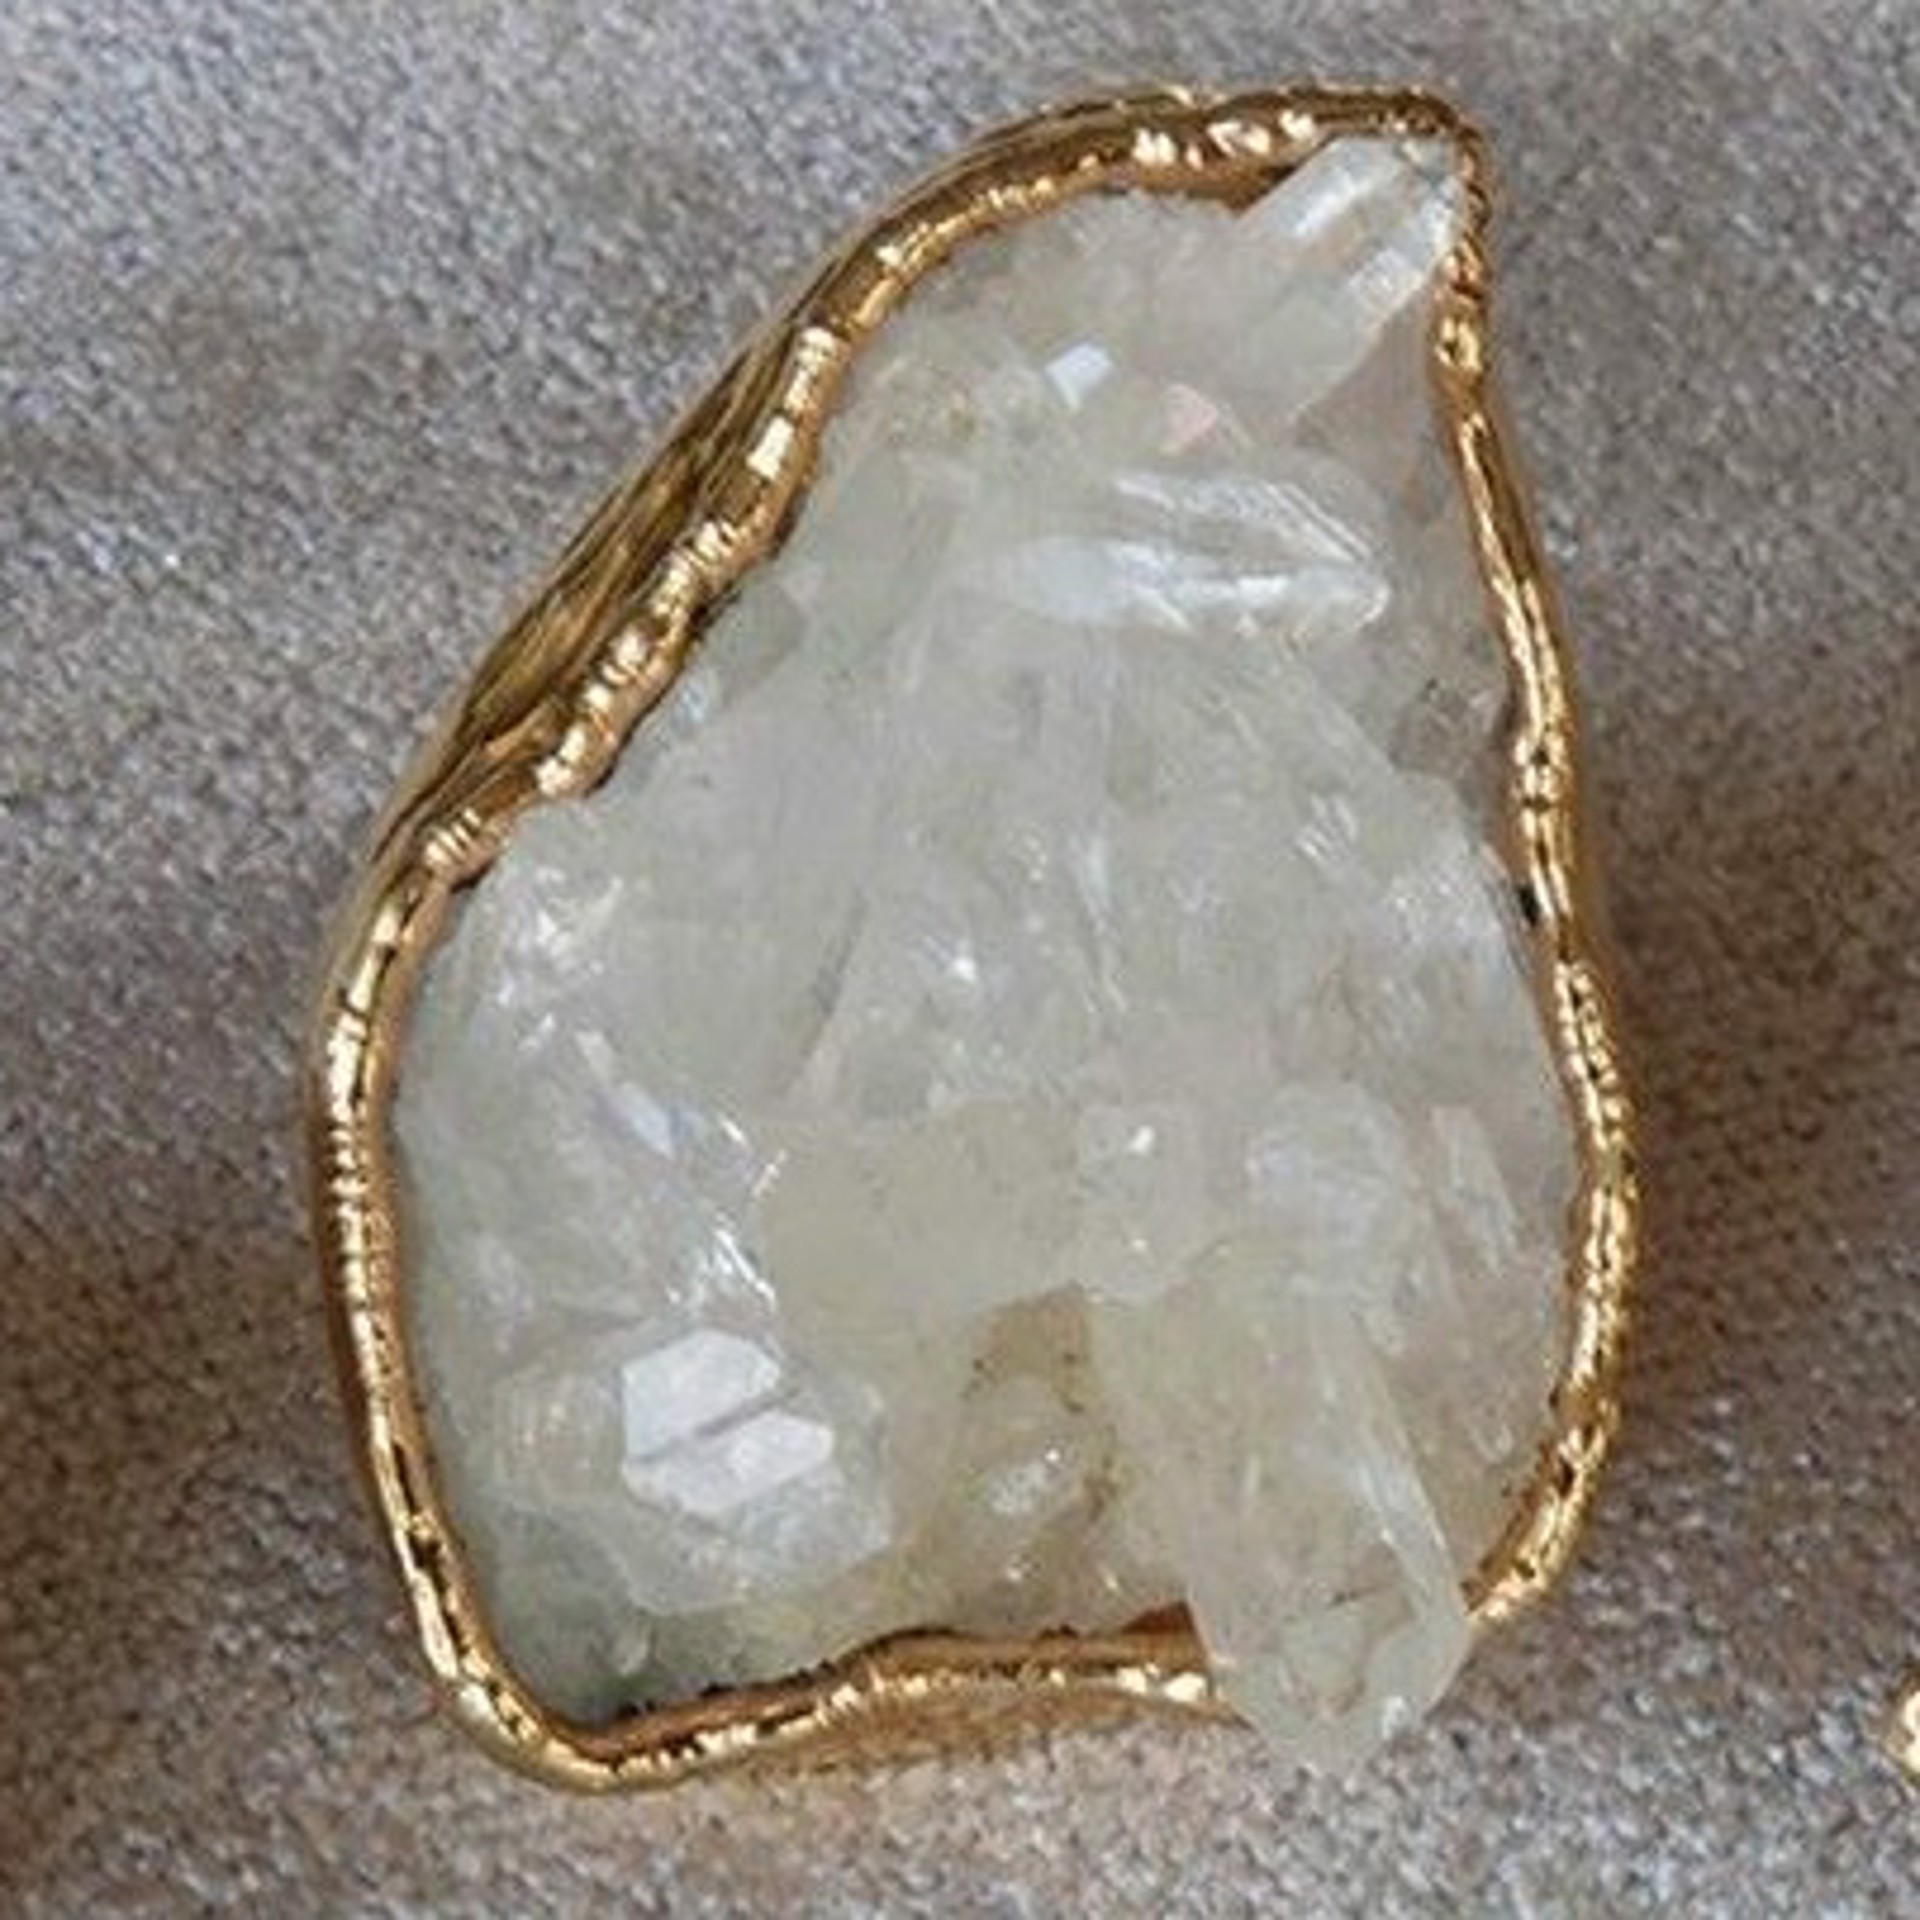 Stunning faceted quartz crystal pyramid very clear like a diamond for making jewelry pendant